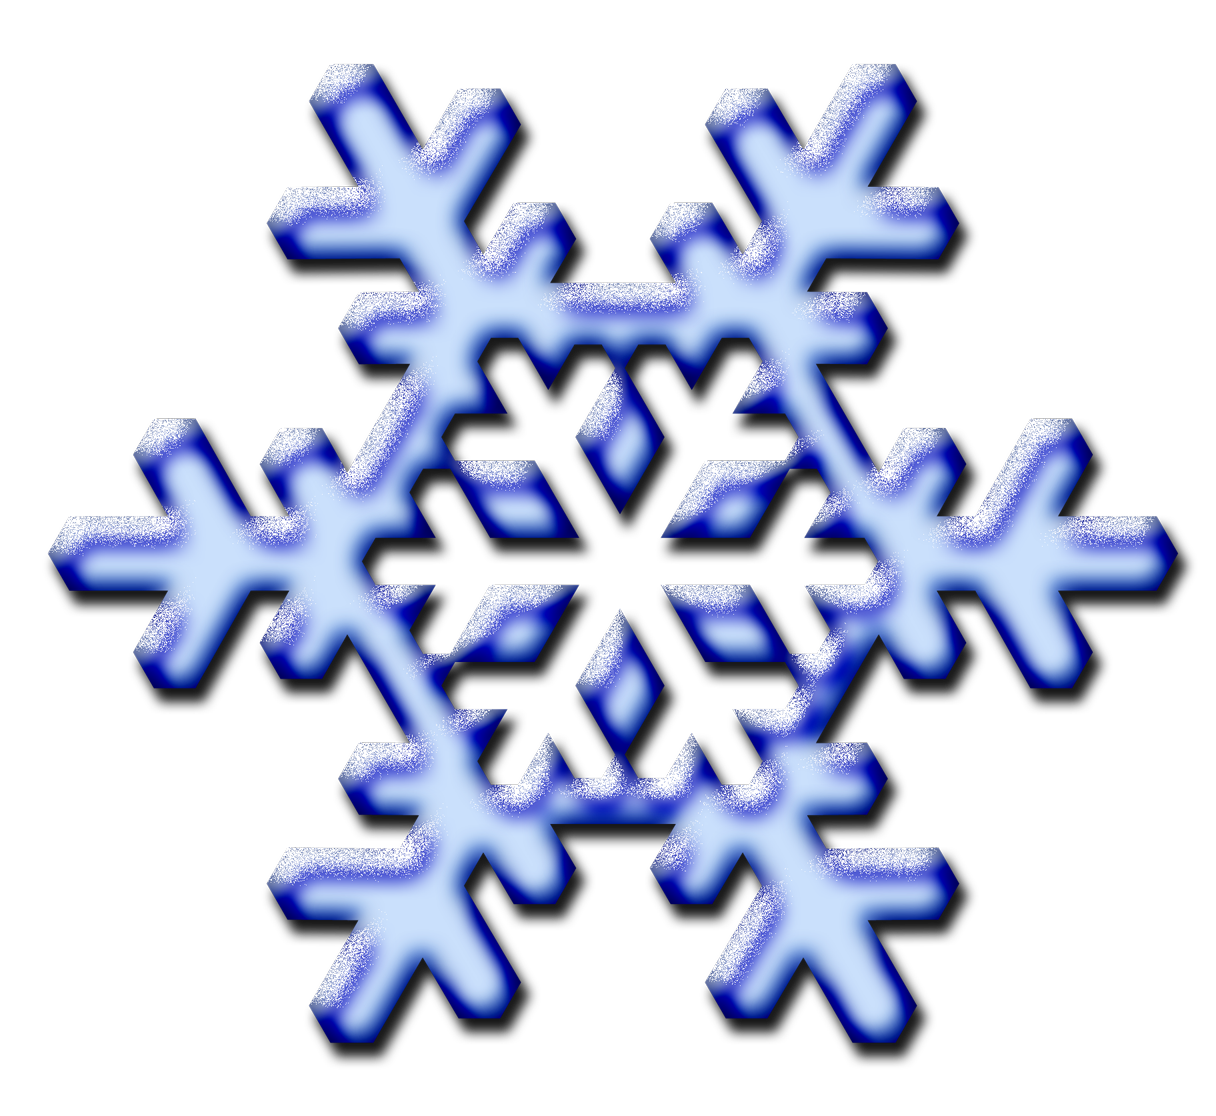 Christmas Snowflake.png - ClipArt Best